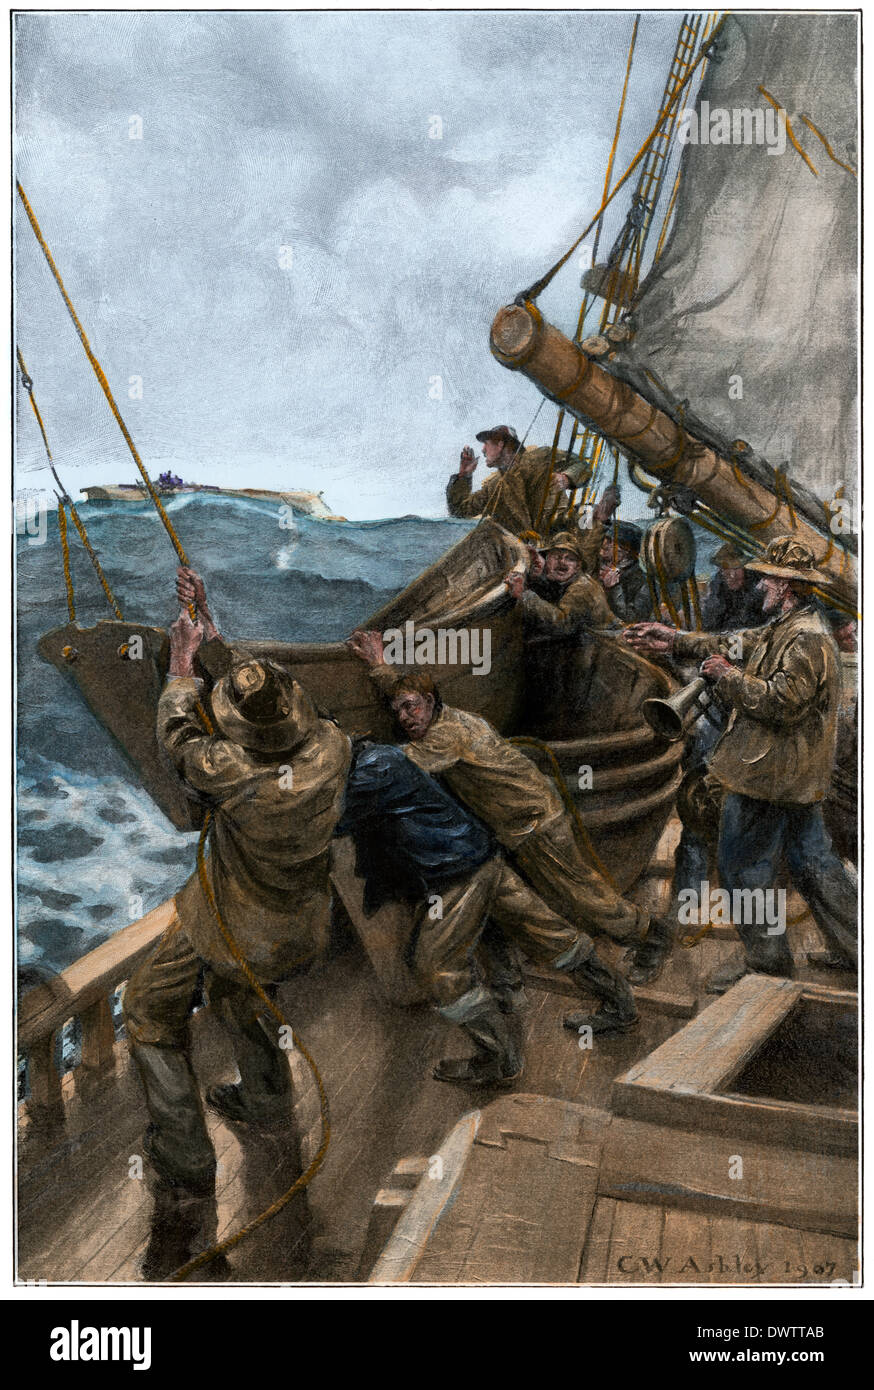 Sailors lowering a lifeboat to rescue shipwrecked sailors, early 1900s. Hand-colored halftone of an illustration Stock Photo